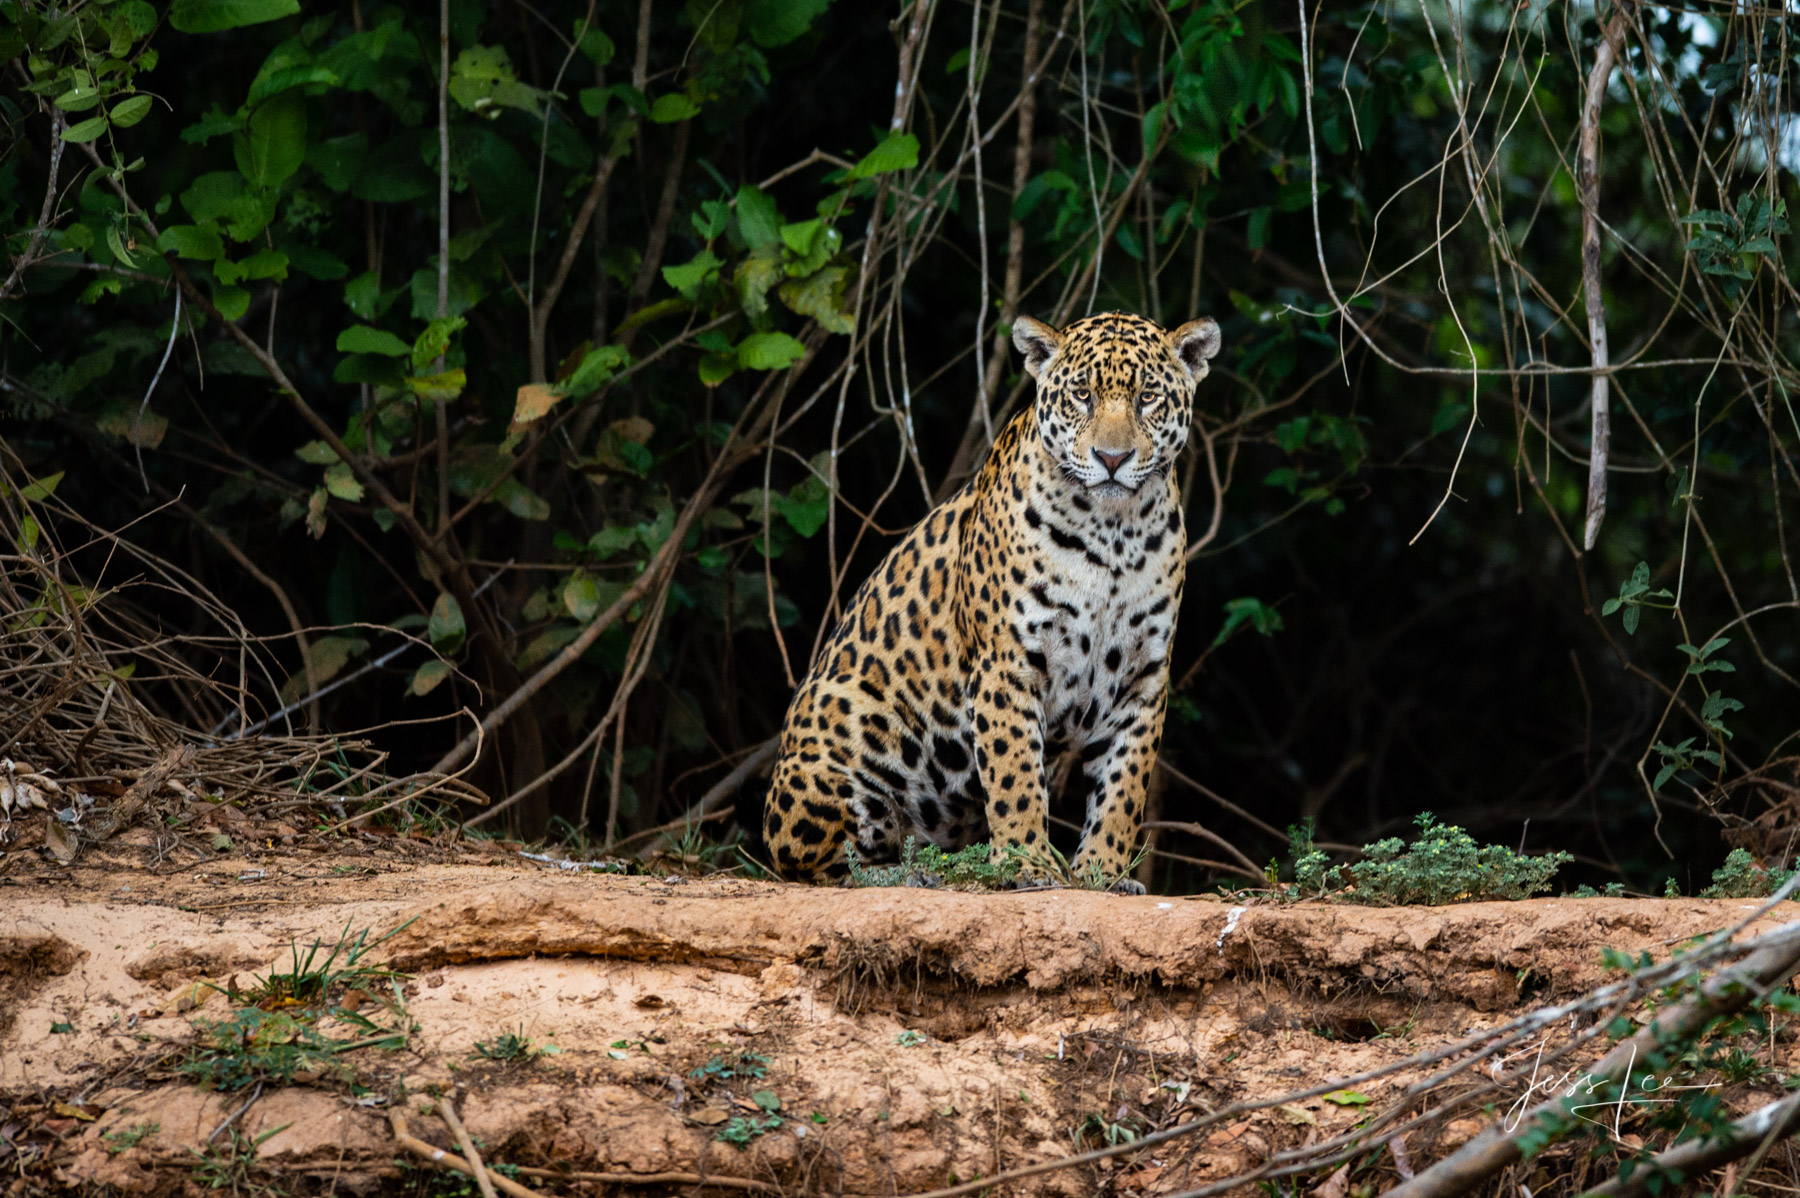 Fine art Jaguar playing the waiting game print limited edition of 300 luxury prints by Jess Lee. All photographs copyright ©...